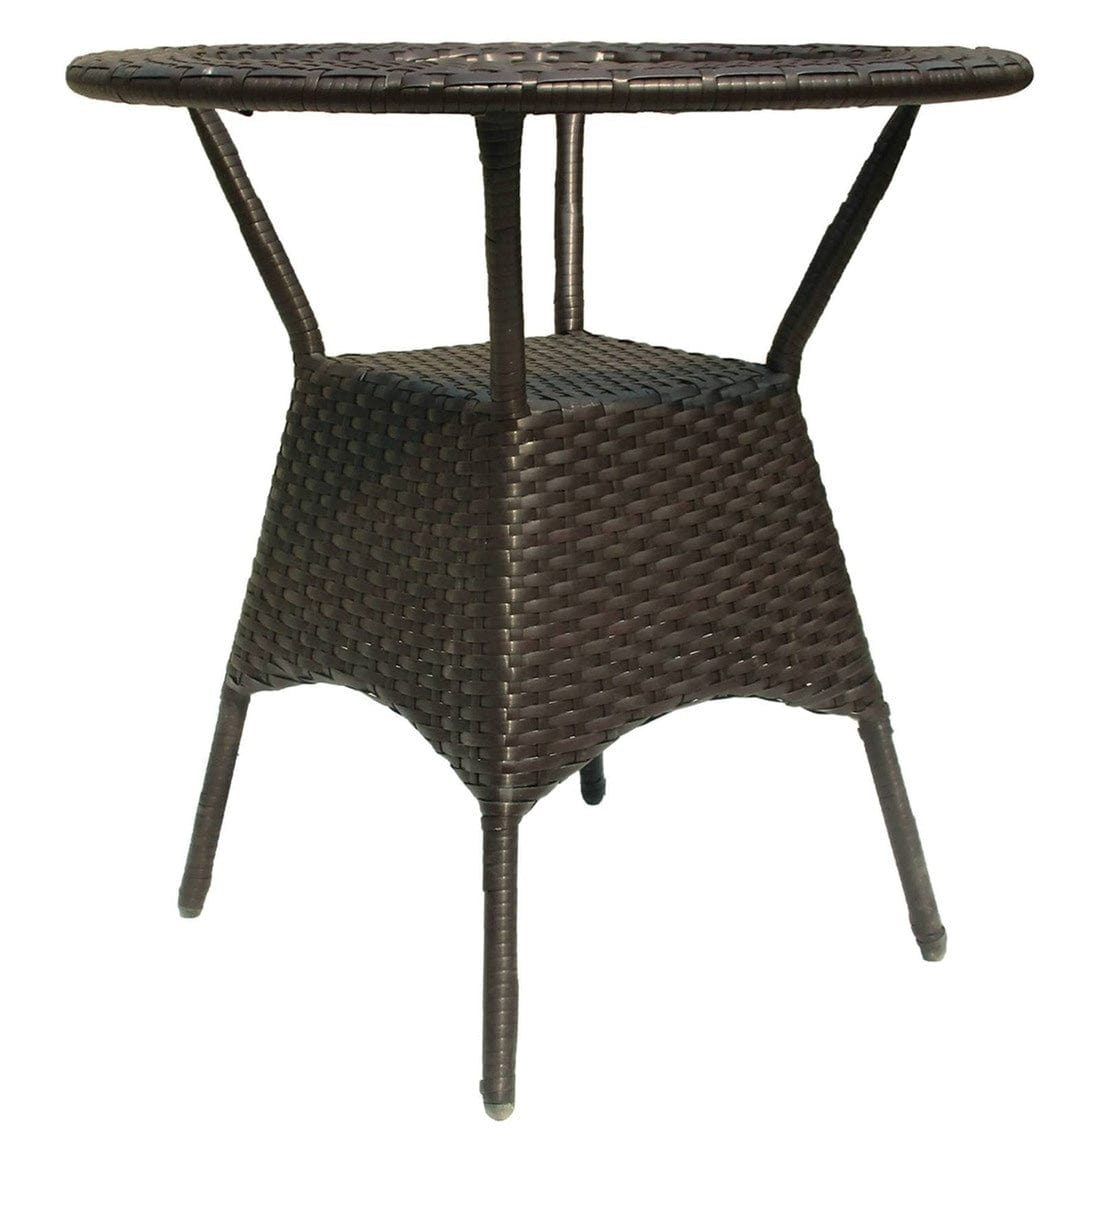 Dreamline Outdoor Coffee Table Set - 2 Chairs And Table Set (Brown)